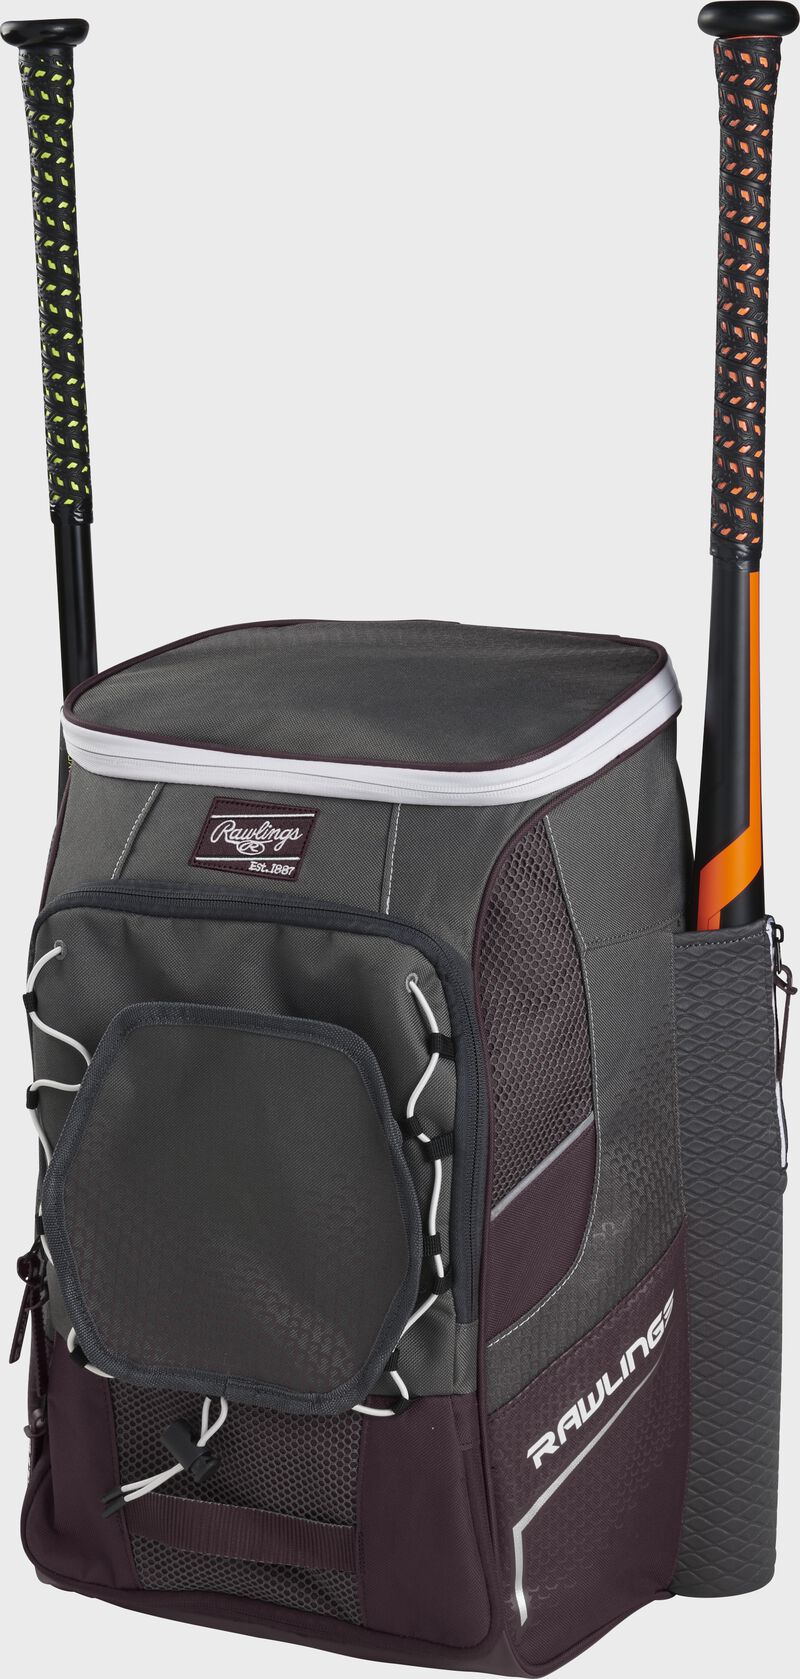 Front right angle view of a maroon Impulse backpack with two bats in the side sleeves - SKU: IMPLSE-MA loading=